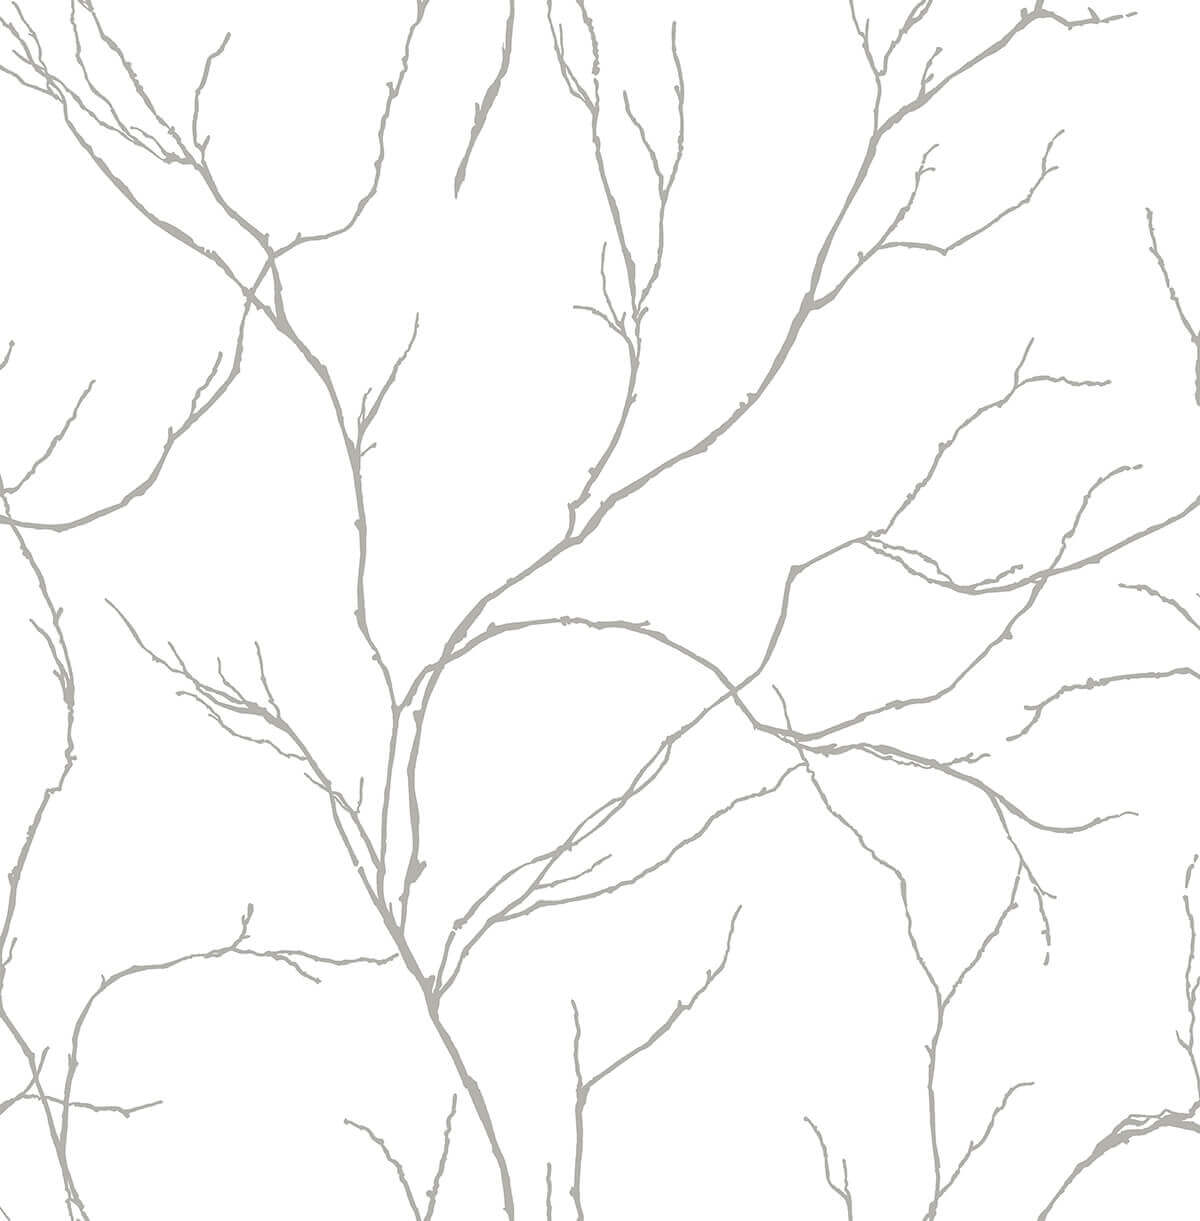 NextWall Delicate Branches Peel & Stick Wallpaper - Silver